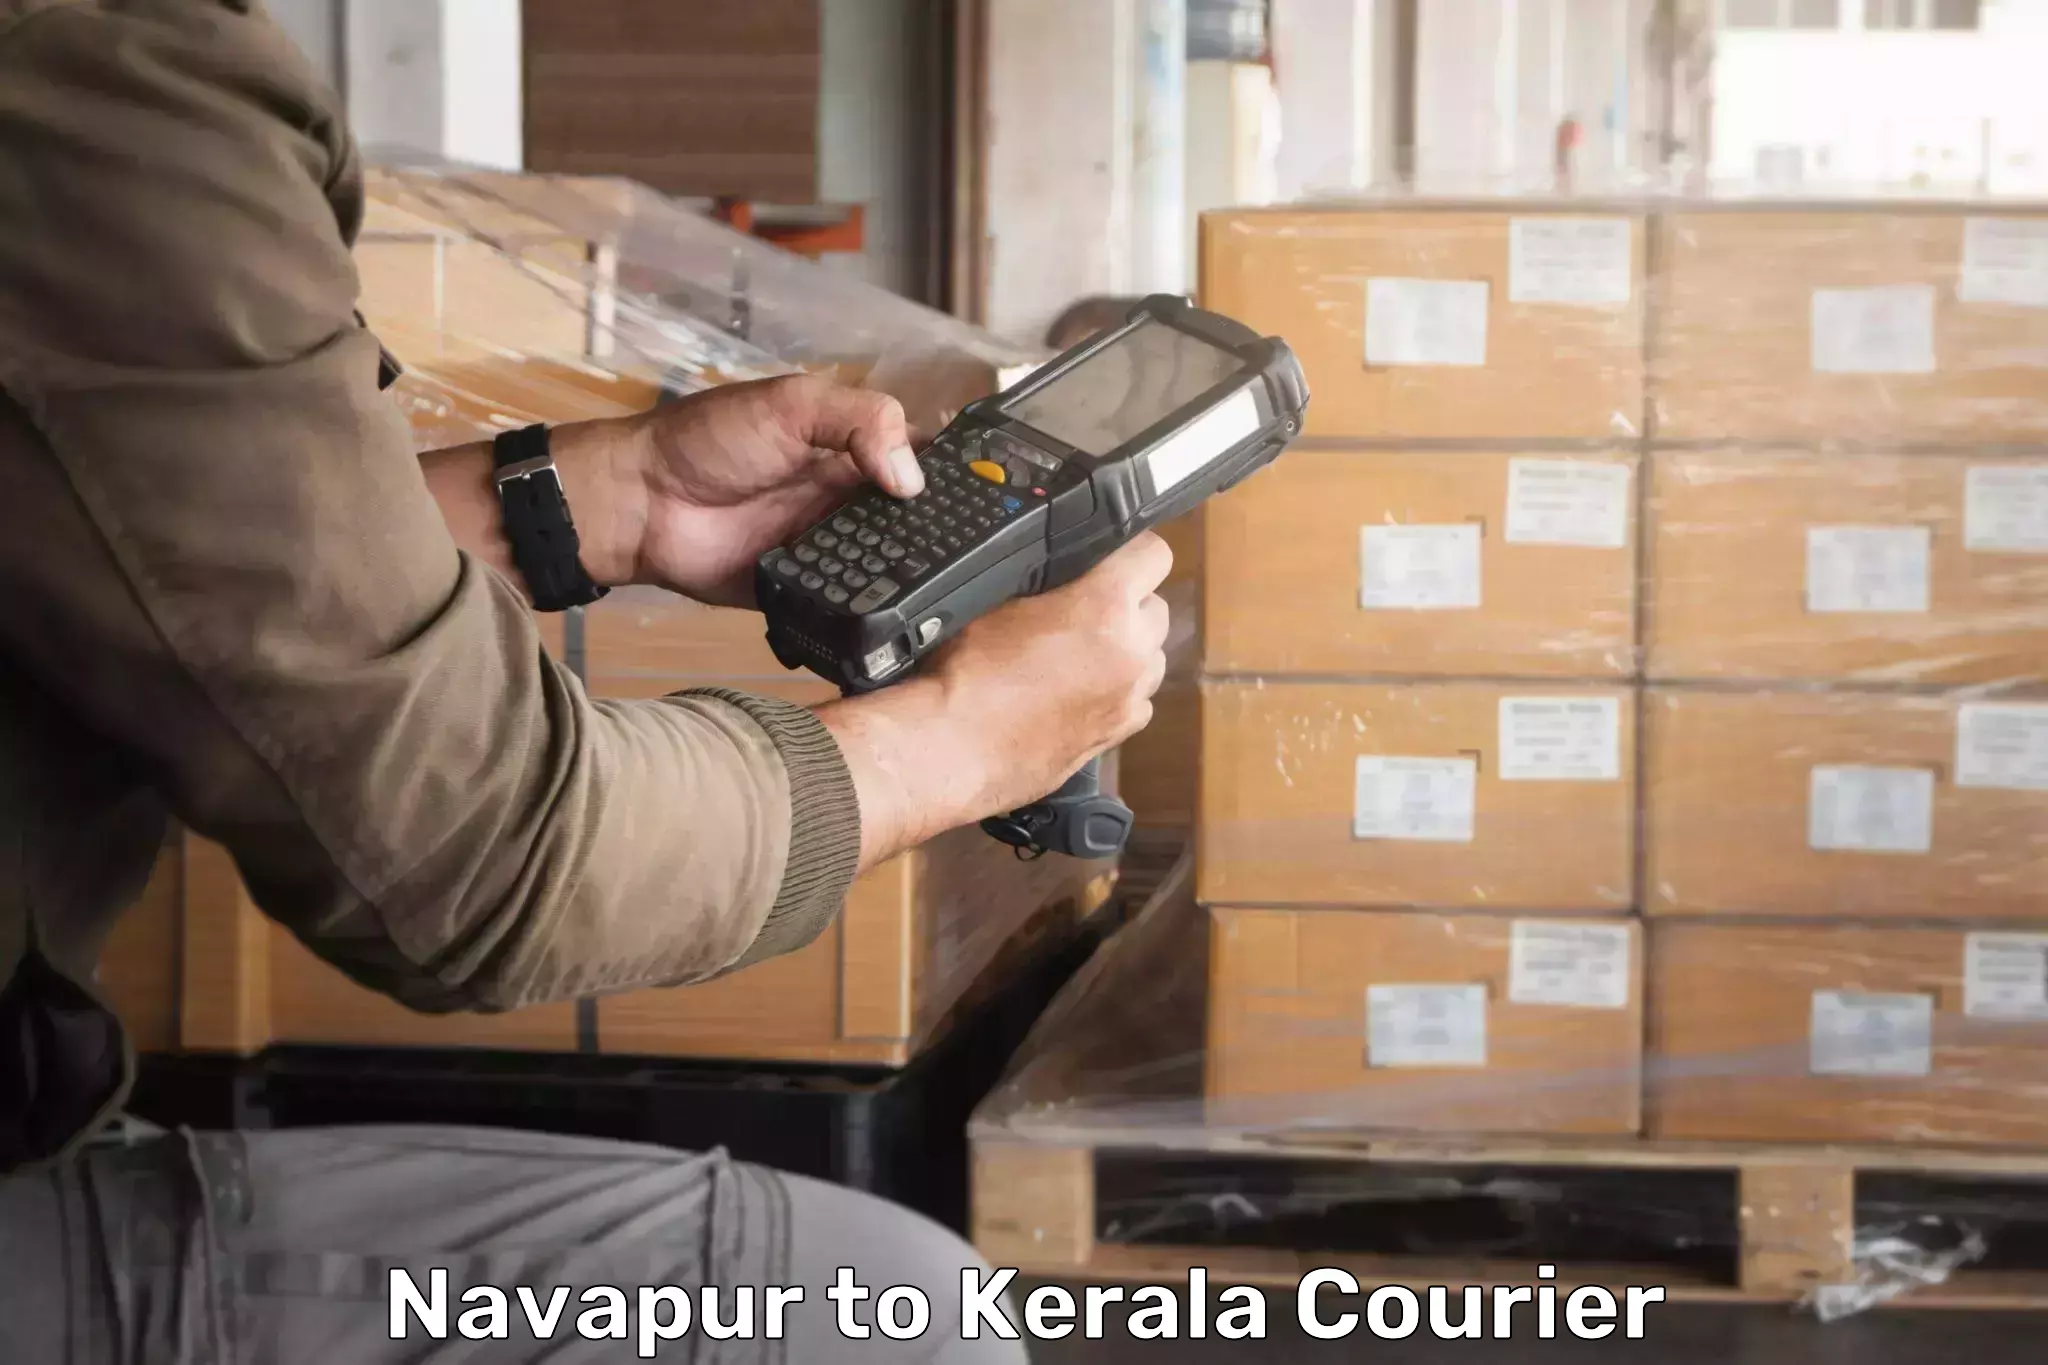 Personal parcel delivery Navapur to Thrissur